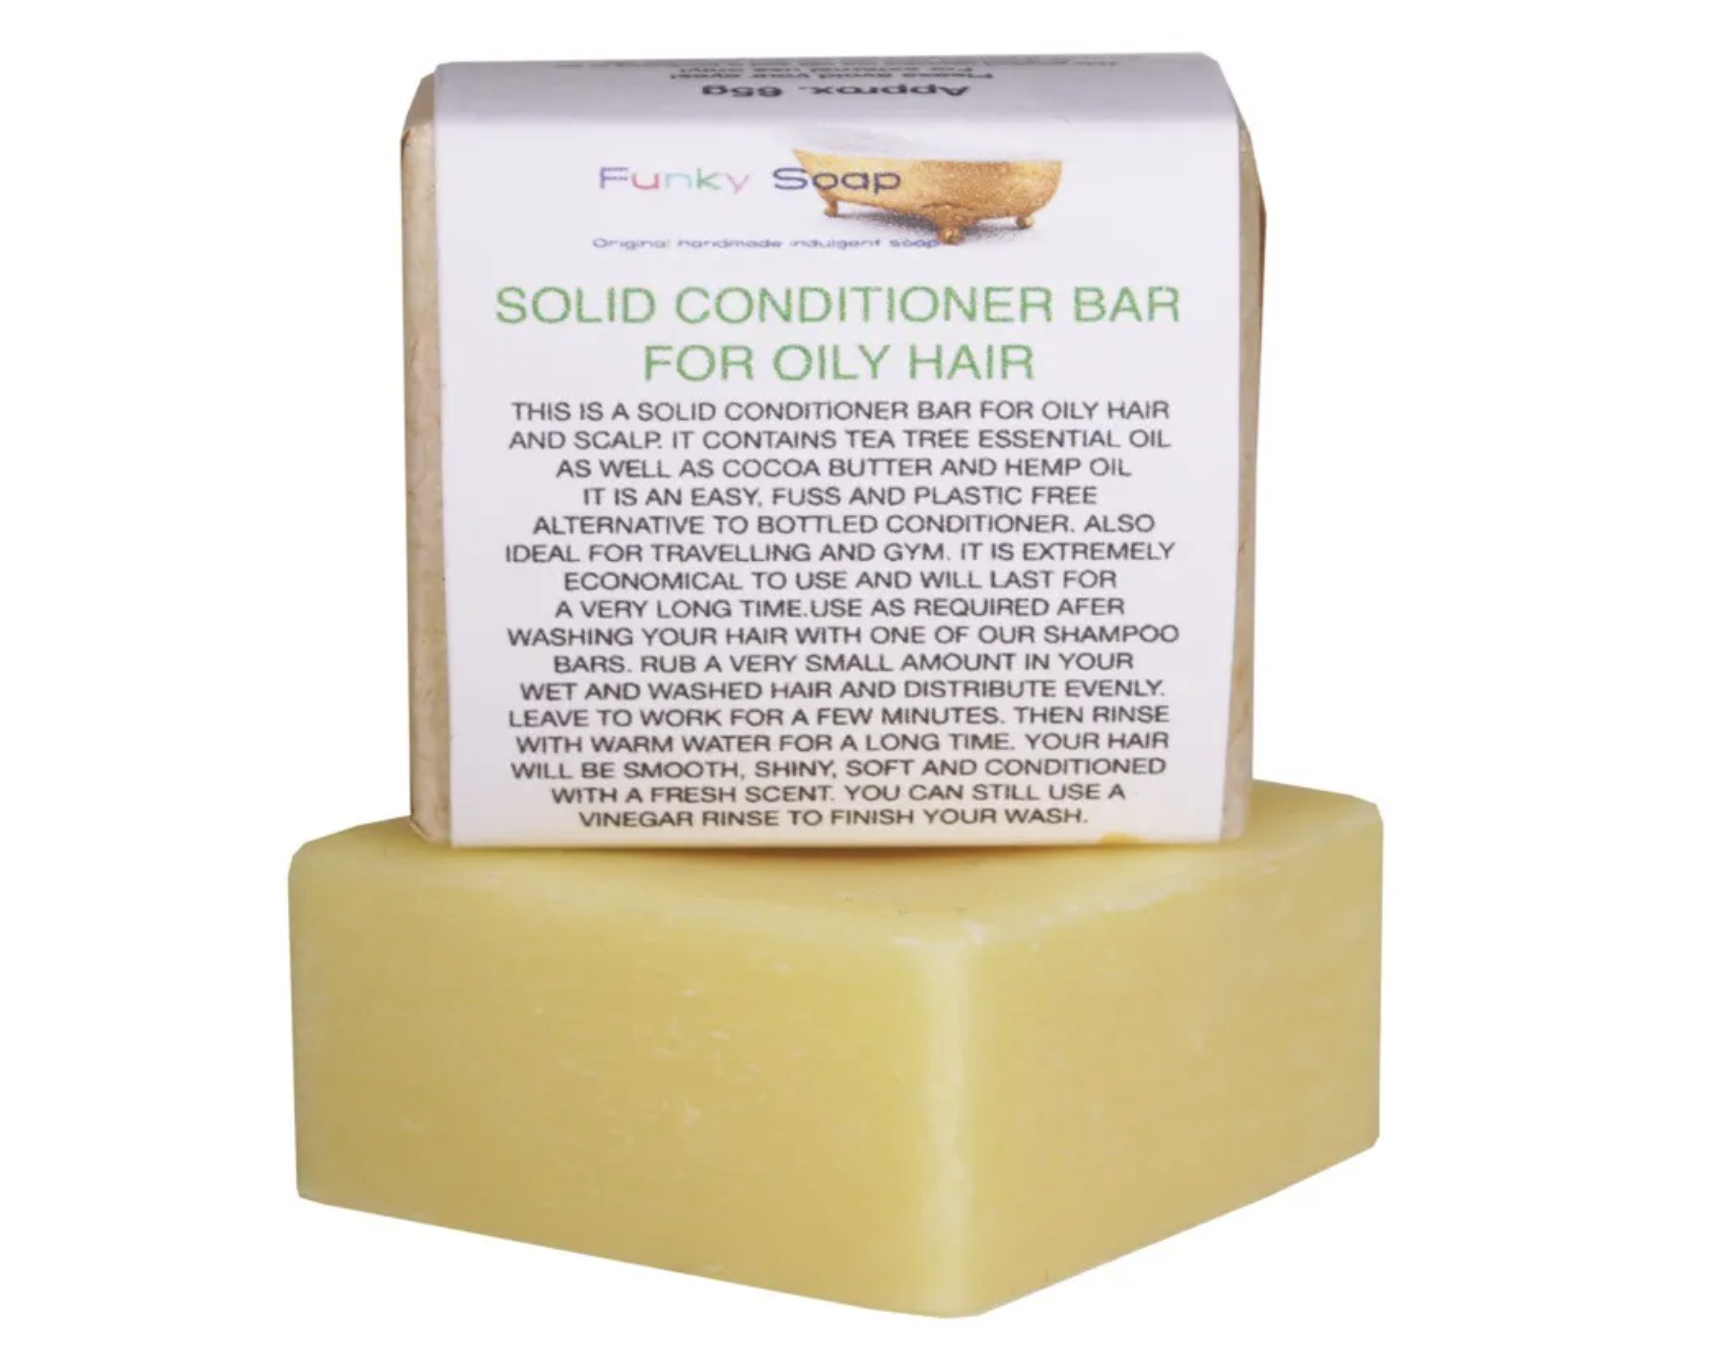 Oily Hair conditioner bar, Travel Size 1 Bar Of 65g 